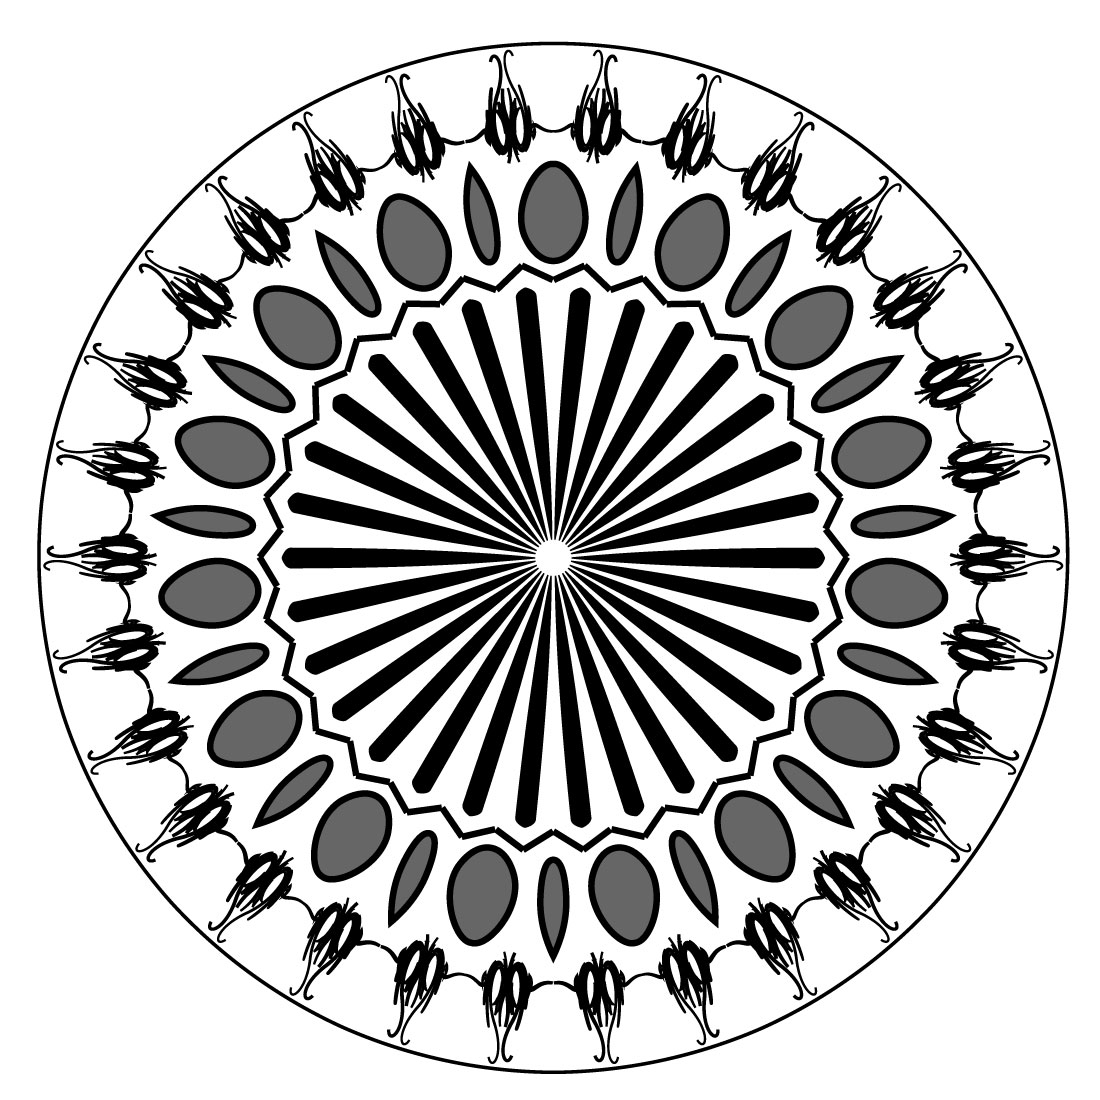 Mandala-Art-with-black-spiral-in-white-background preview image.